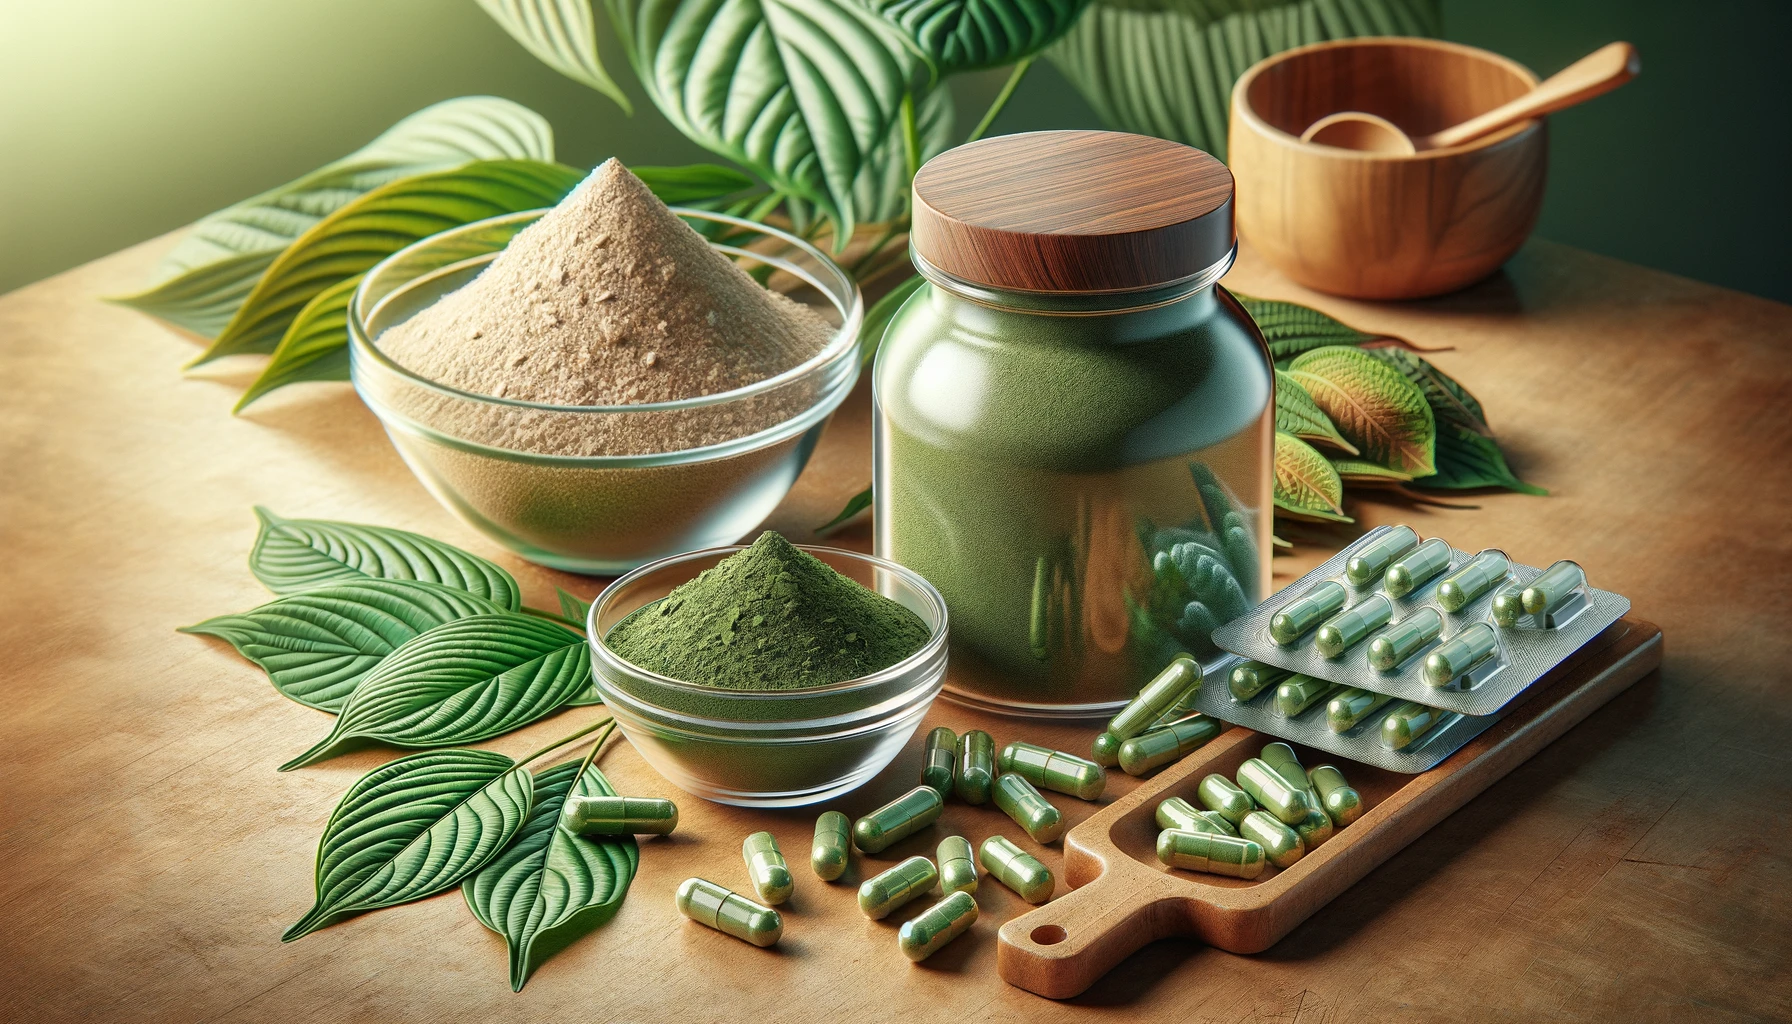 Create a hyper-realistic image showcasing various forms of kratom products without any specific brand labels. Include finely ground green powder in a clear jar, dried crushed leaves in a glass bowl, and capsules arranged neatly on a wooden table. Ensure that all items have different textures to highlight their unique forms. Add a small measuring spoon beside the powder and a leafy plant in the background for a natural aesthetic.